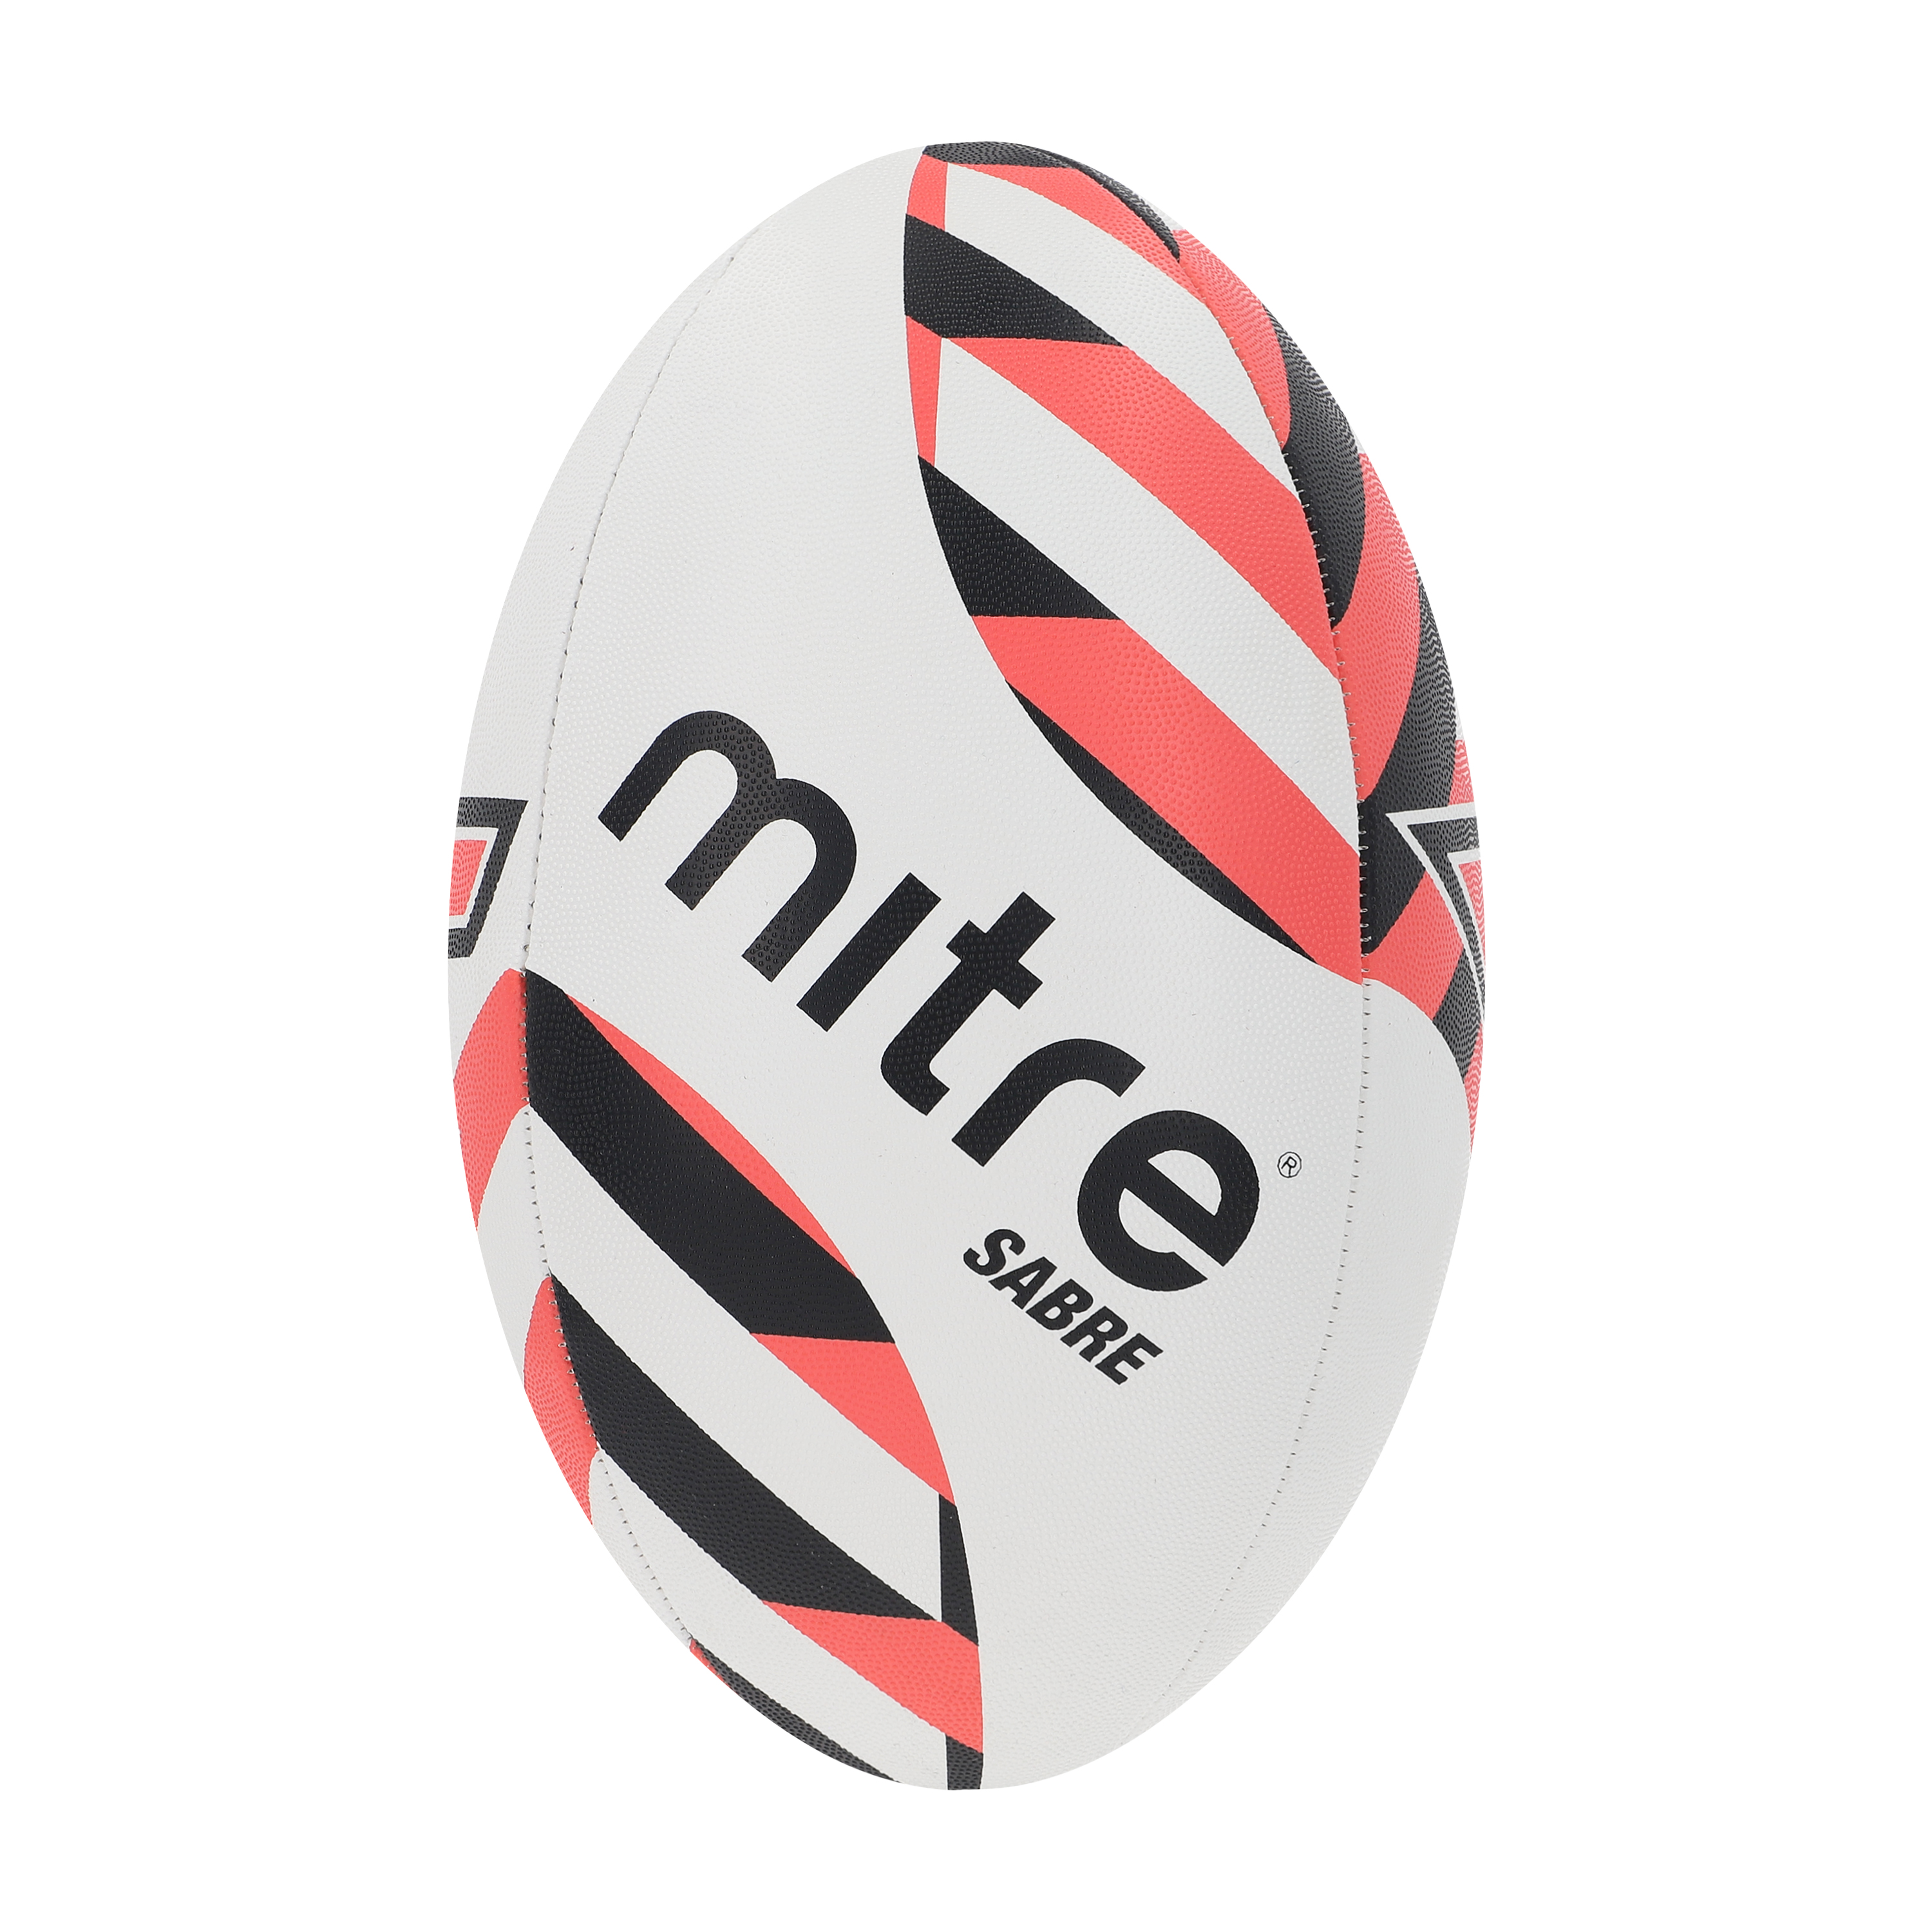 PRGP06048 - Mitre Sabre Rugby Ball - Size 3 - Pack of 12 with Bag | Davies  Sports